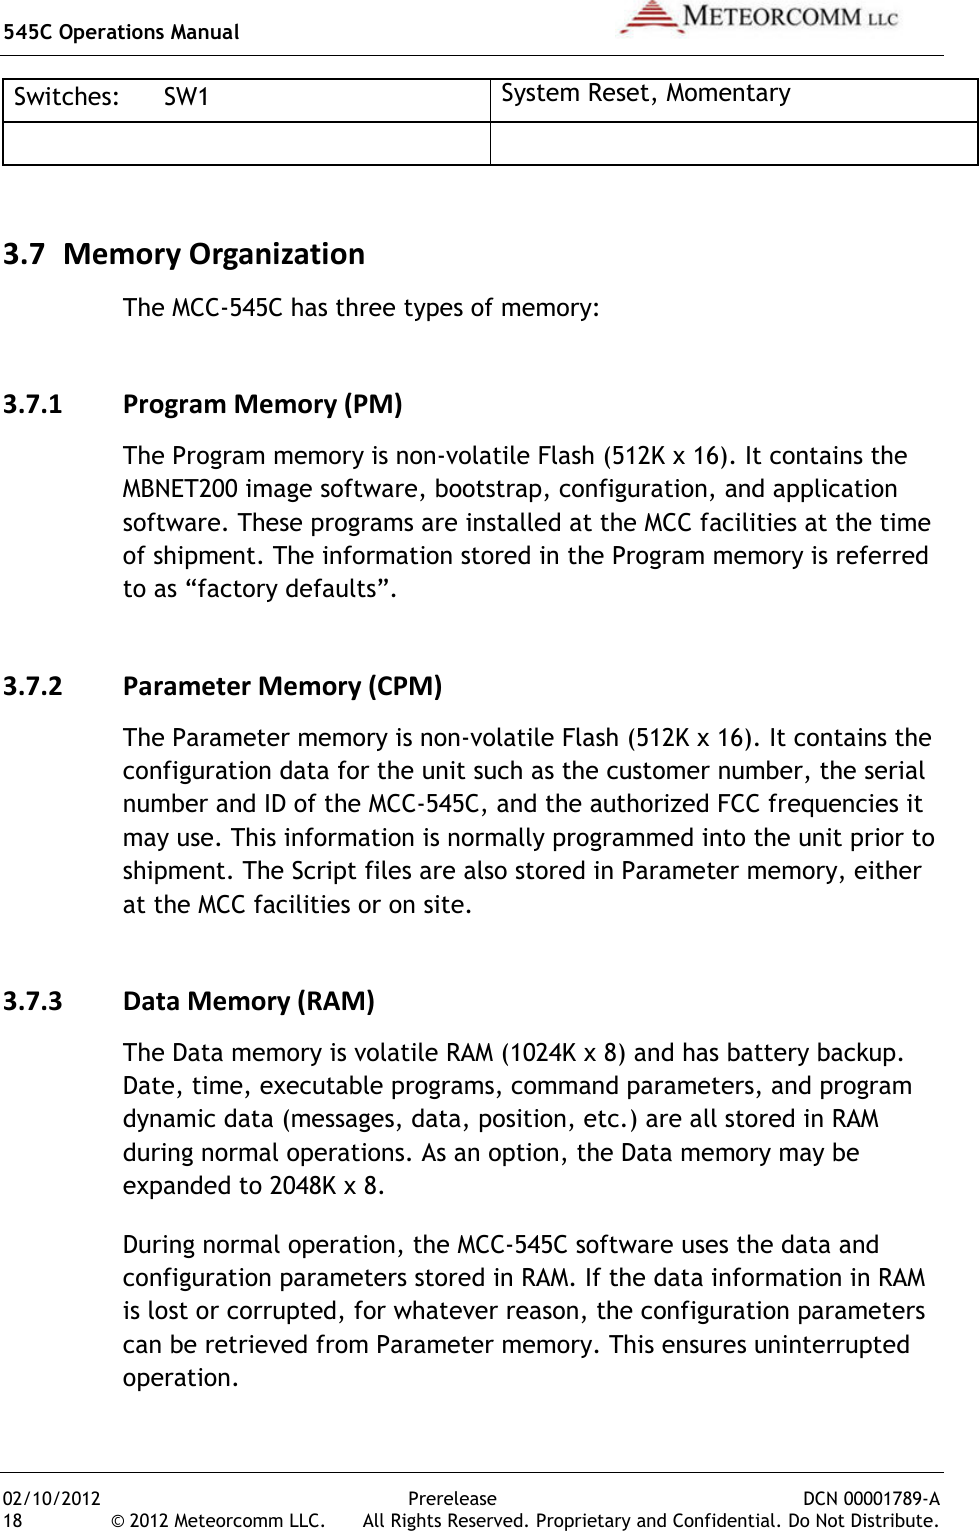 545C Operations Manual   02/10/2012  Prerelease  DCN 00001789-A 18  © 2012 Meteorcomm LLC.   All Rights Reserved. Proprietary and Confidential. Do Not Distribute. Switches:  SW1 System Reset, Momentary   3.7 Memory Organization The MCC-545C has three types of memory: 3.7.1 Program Memory (PM) The Program memory is non-volatile Flash (512K x 16). It contains the MBNET200 image software, bootstrap, configuration, and application software. These programs are installed at the MCC facilities at the time of shipment. The information stored in the Program memory is referred to as “factory defaults”. 3.7.2 Parameter Memory (CPM) The Parameter memory is non-volatile Flash (512K x 16). It contains the configuration data for the unit such as the customer number, the serial number and ID of the MCC-545C, and the authorized FCC frequencies it may use. This information is normally programmed into the unit prior to shipment. The Script files are also stored in Parameter memory, either at the MCC facilities or on site. 3.7.3 Data Memory (RAM) The Data memory is volatile RAM (1024K x 8) and has battery backup. Date, time, executable programs, command parameters, and program dynamic data (messages, data, position, etc.) are all stored in RAM during normal operations. As an option, the Data memory may be expanded to 2048K x 8. During normal operation, the MCC-545C software uses the data and configuration parameters stored in RAM. If the data information in RAM is lost or corrupted, for whatever reason, the configuration parameters can be retrieved from Parameter memory. This ensures uninterrupted operation. 